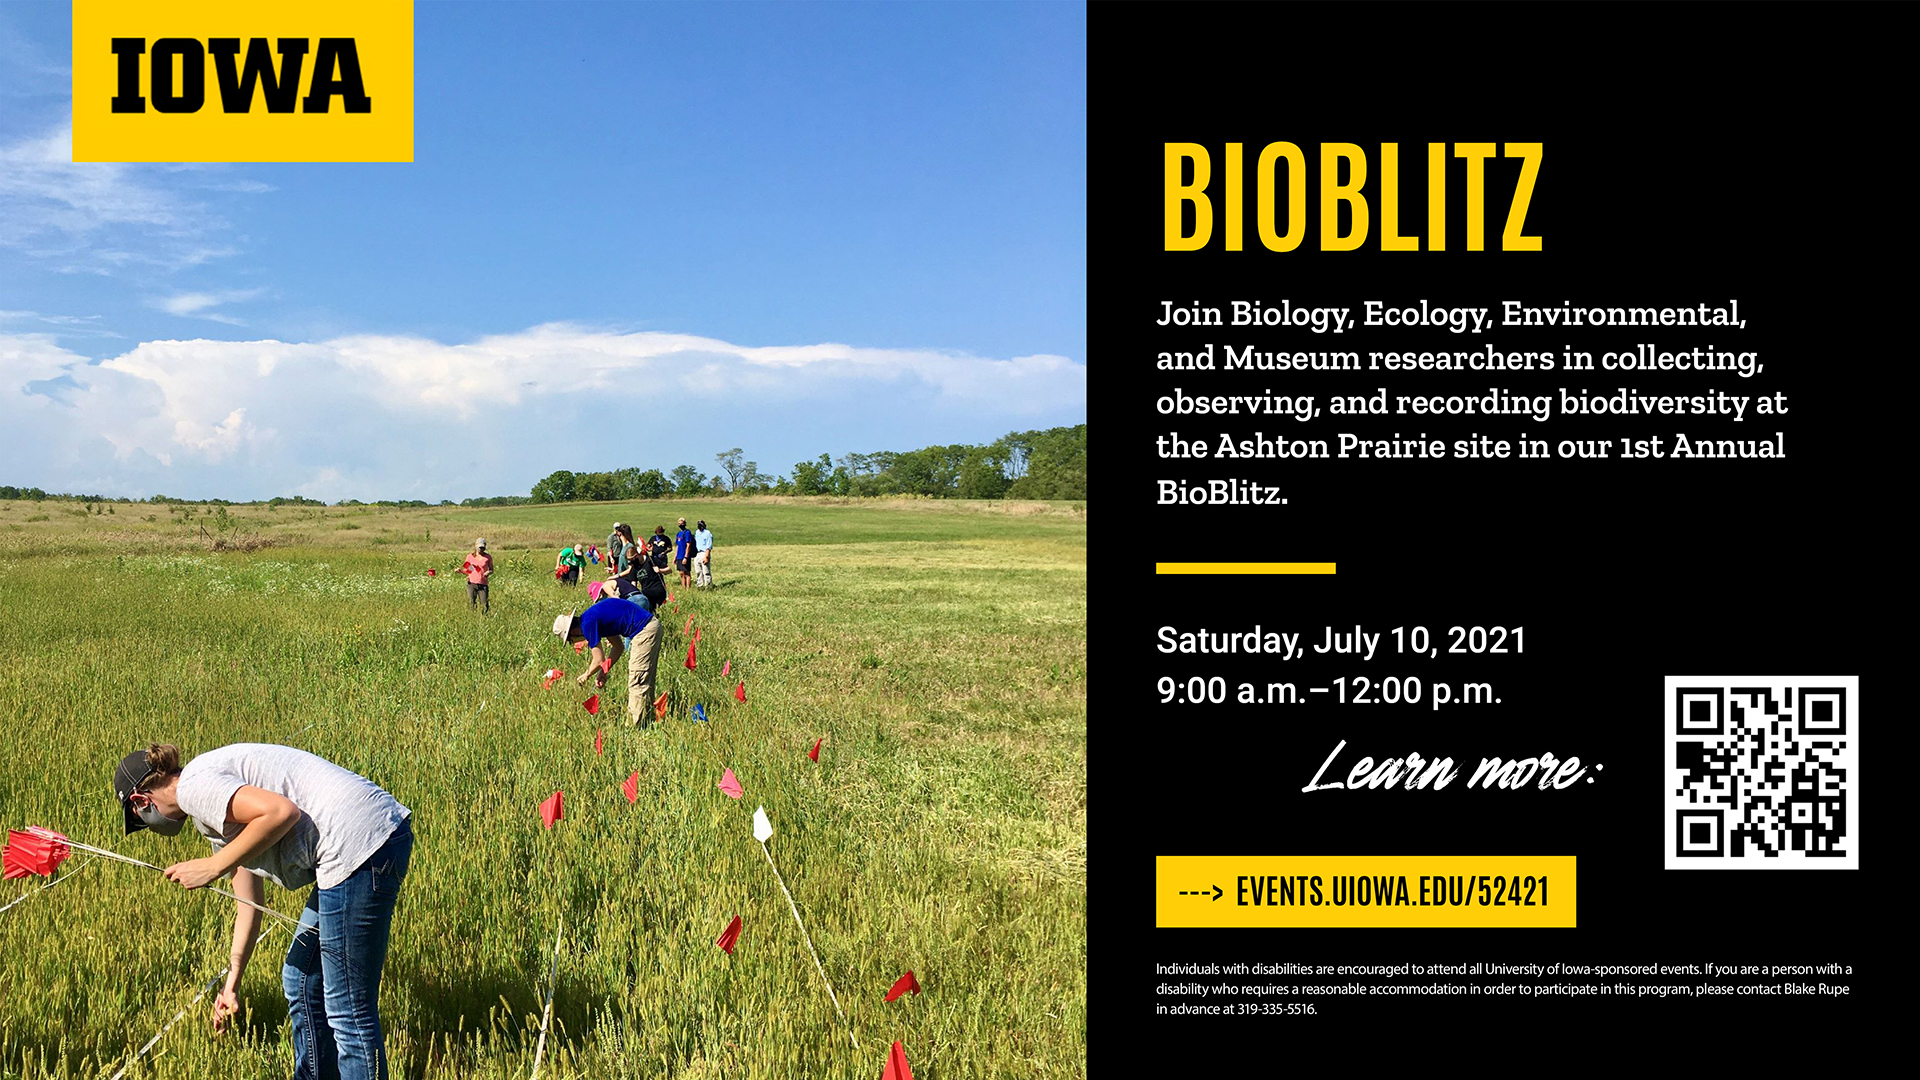 1st Annual BioBlitz at the Ashton Prairie Site on Saturday, July 10 from 9am-12pm